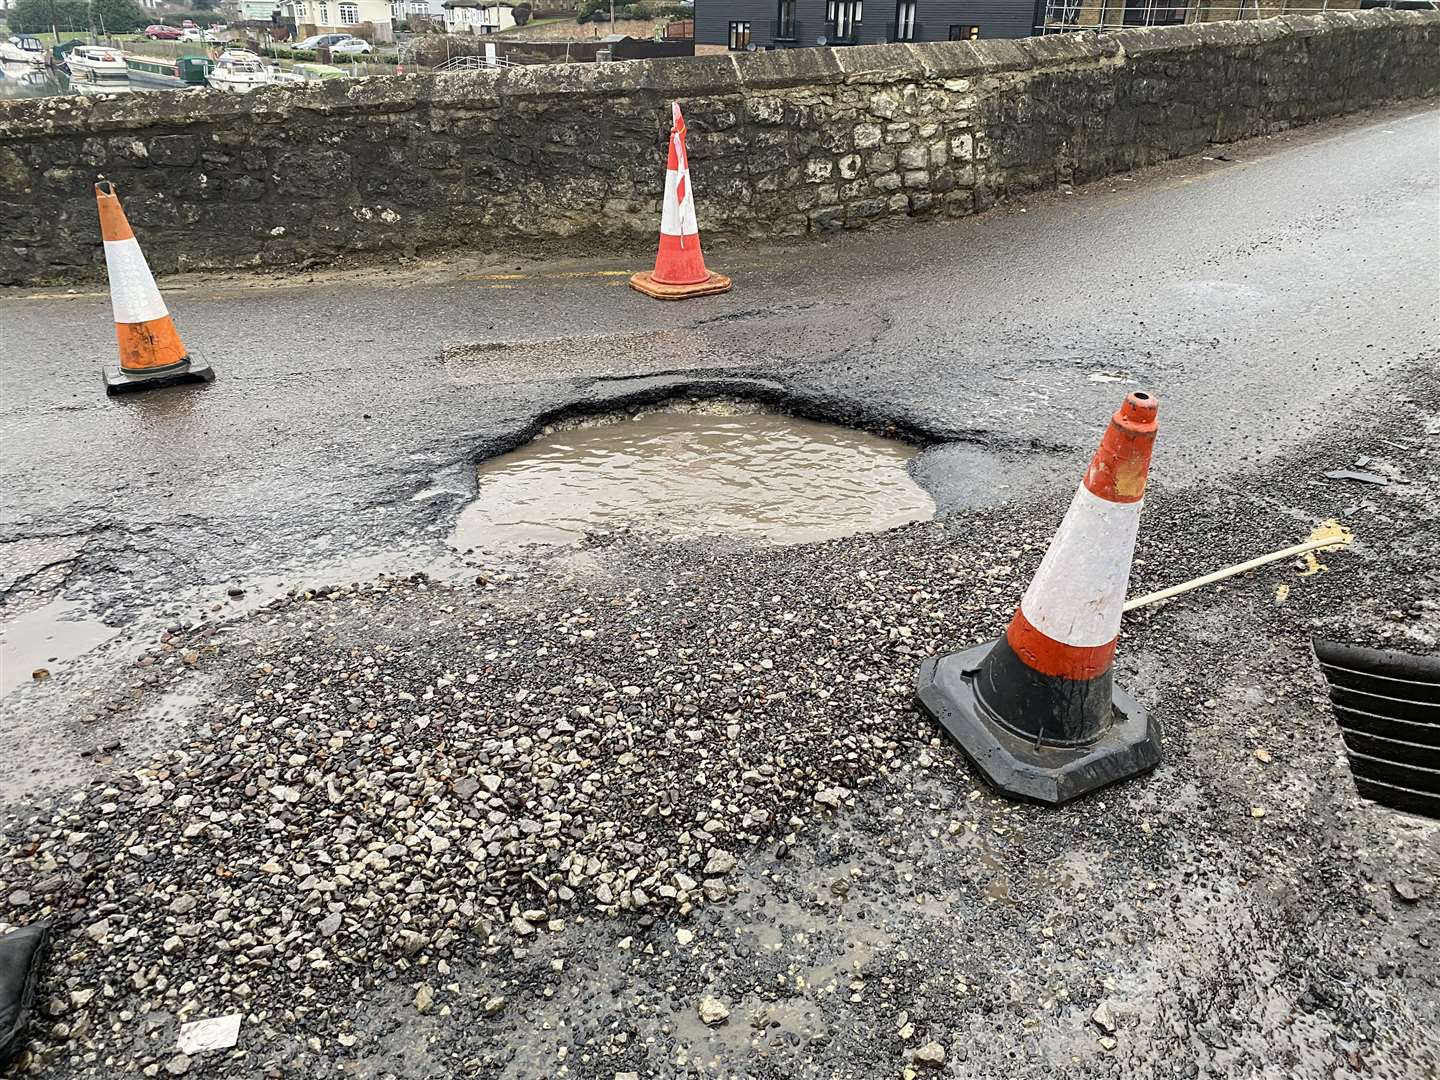 British Cycling says more priority needs to be given to repairing roads